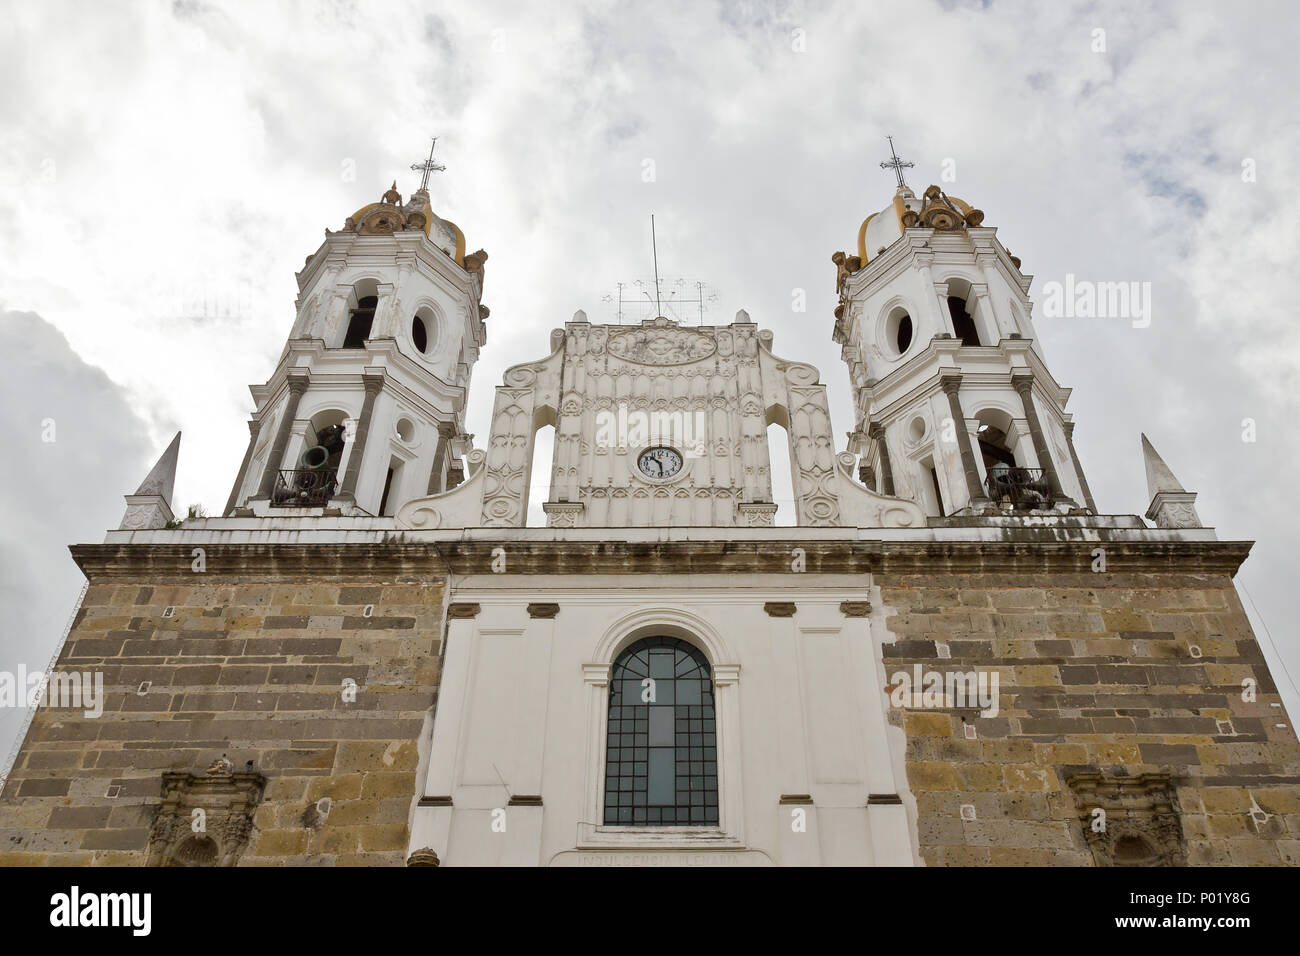 Old church towers in Tlaquepaque, Mexico Stock Photo